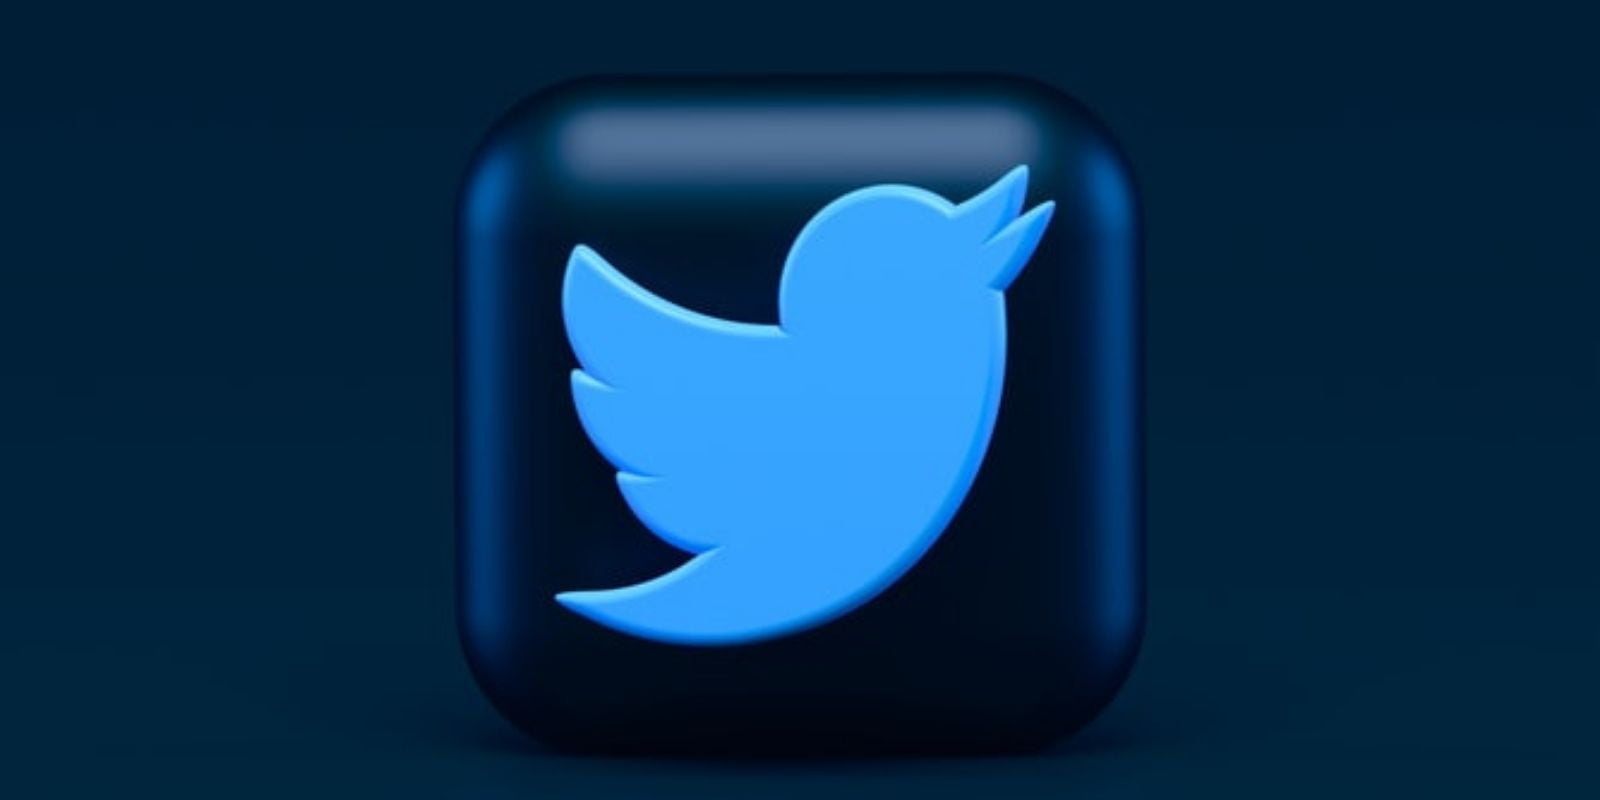 Twitter Launches Its First Ever Subscription Service “Twitter Blue”